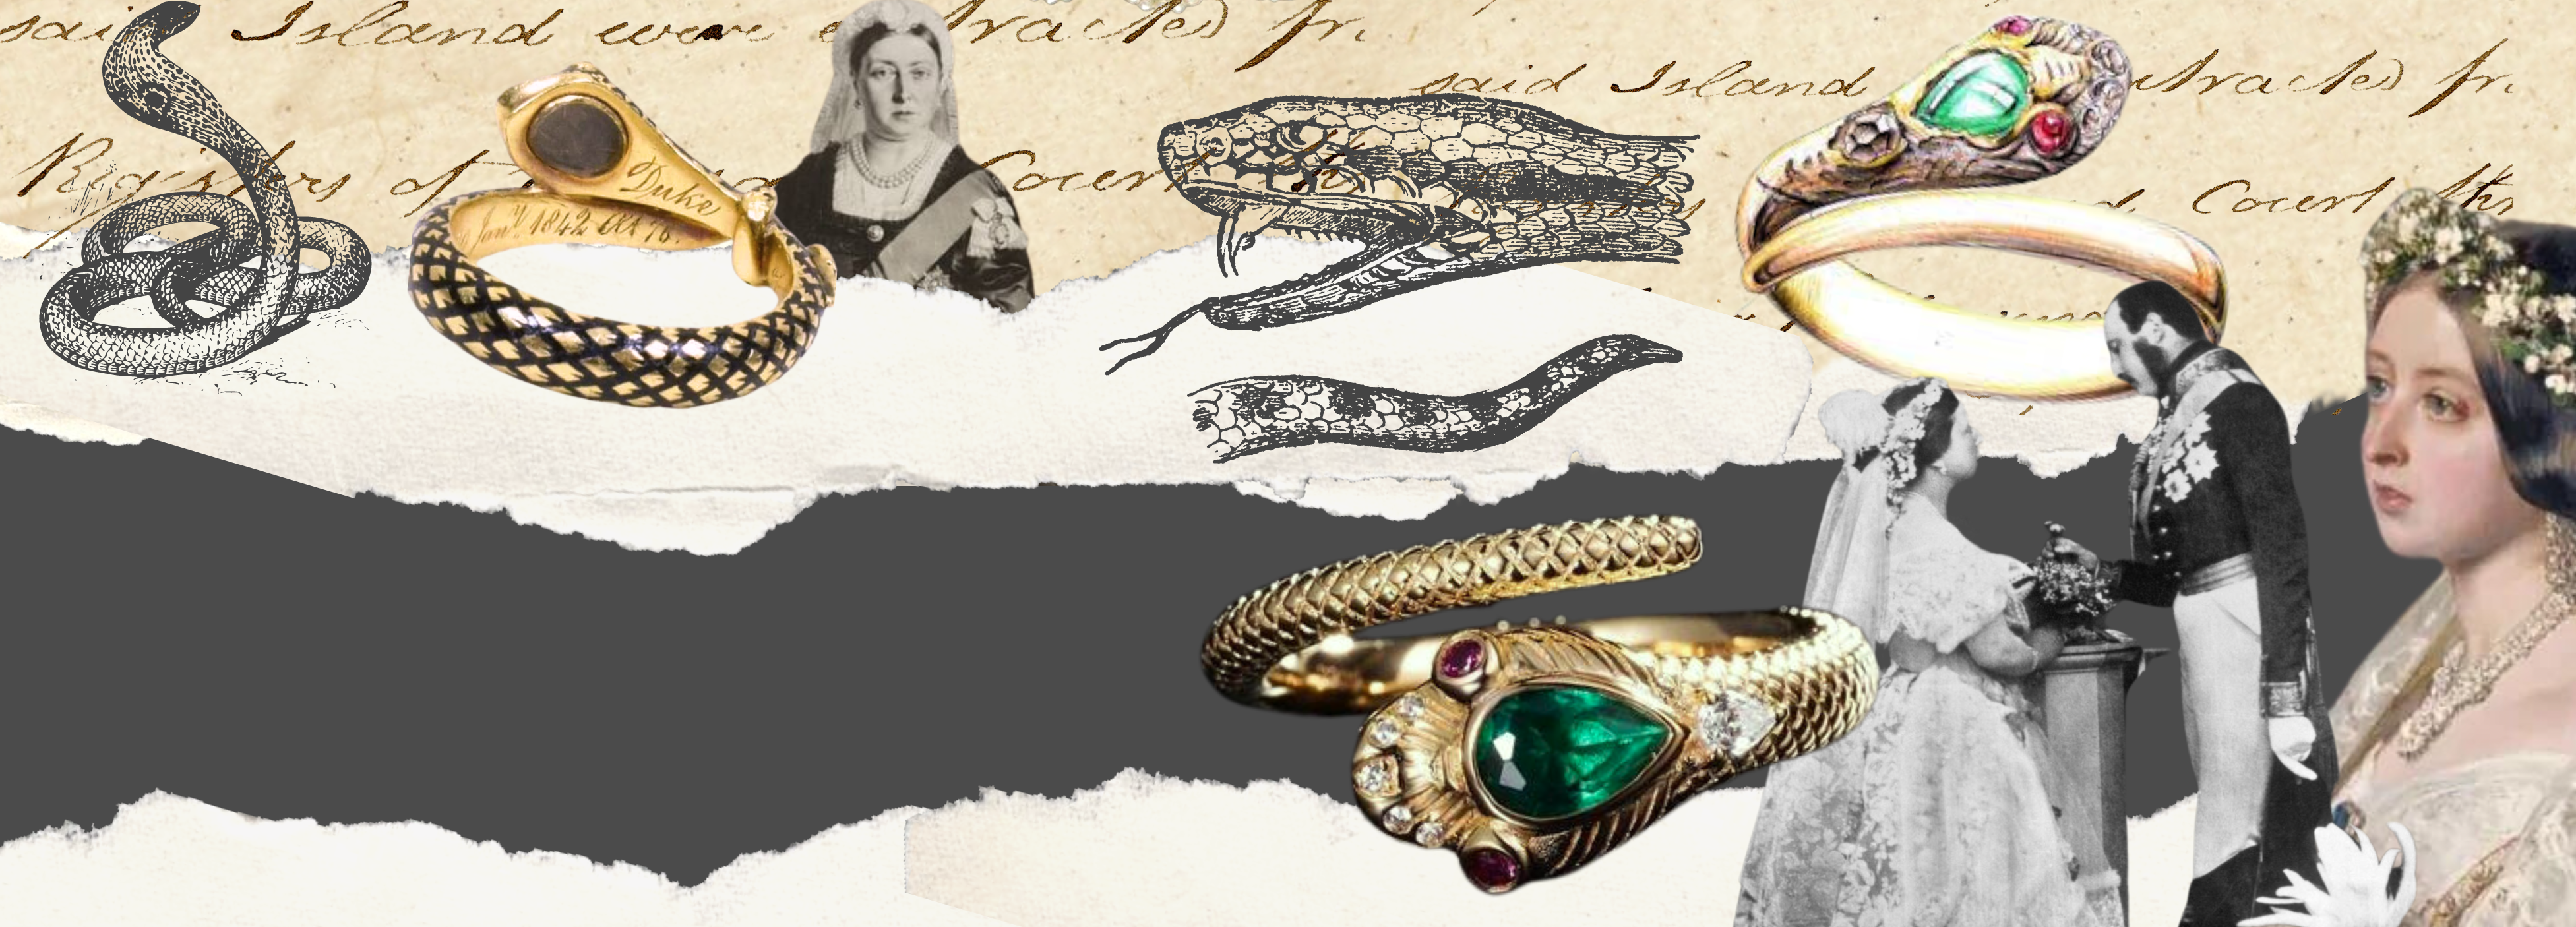 Queen Victoria's Dazzling Jewels go on Display in London | Jewelry |  Sotheby's